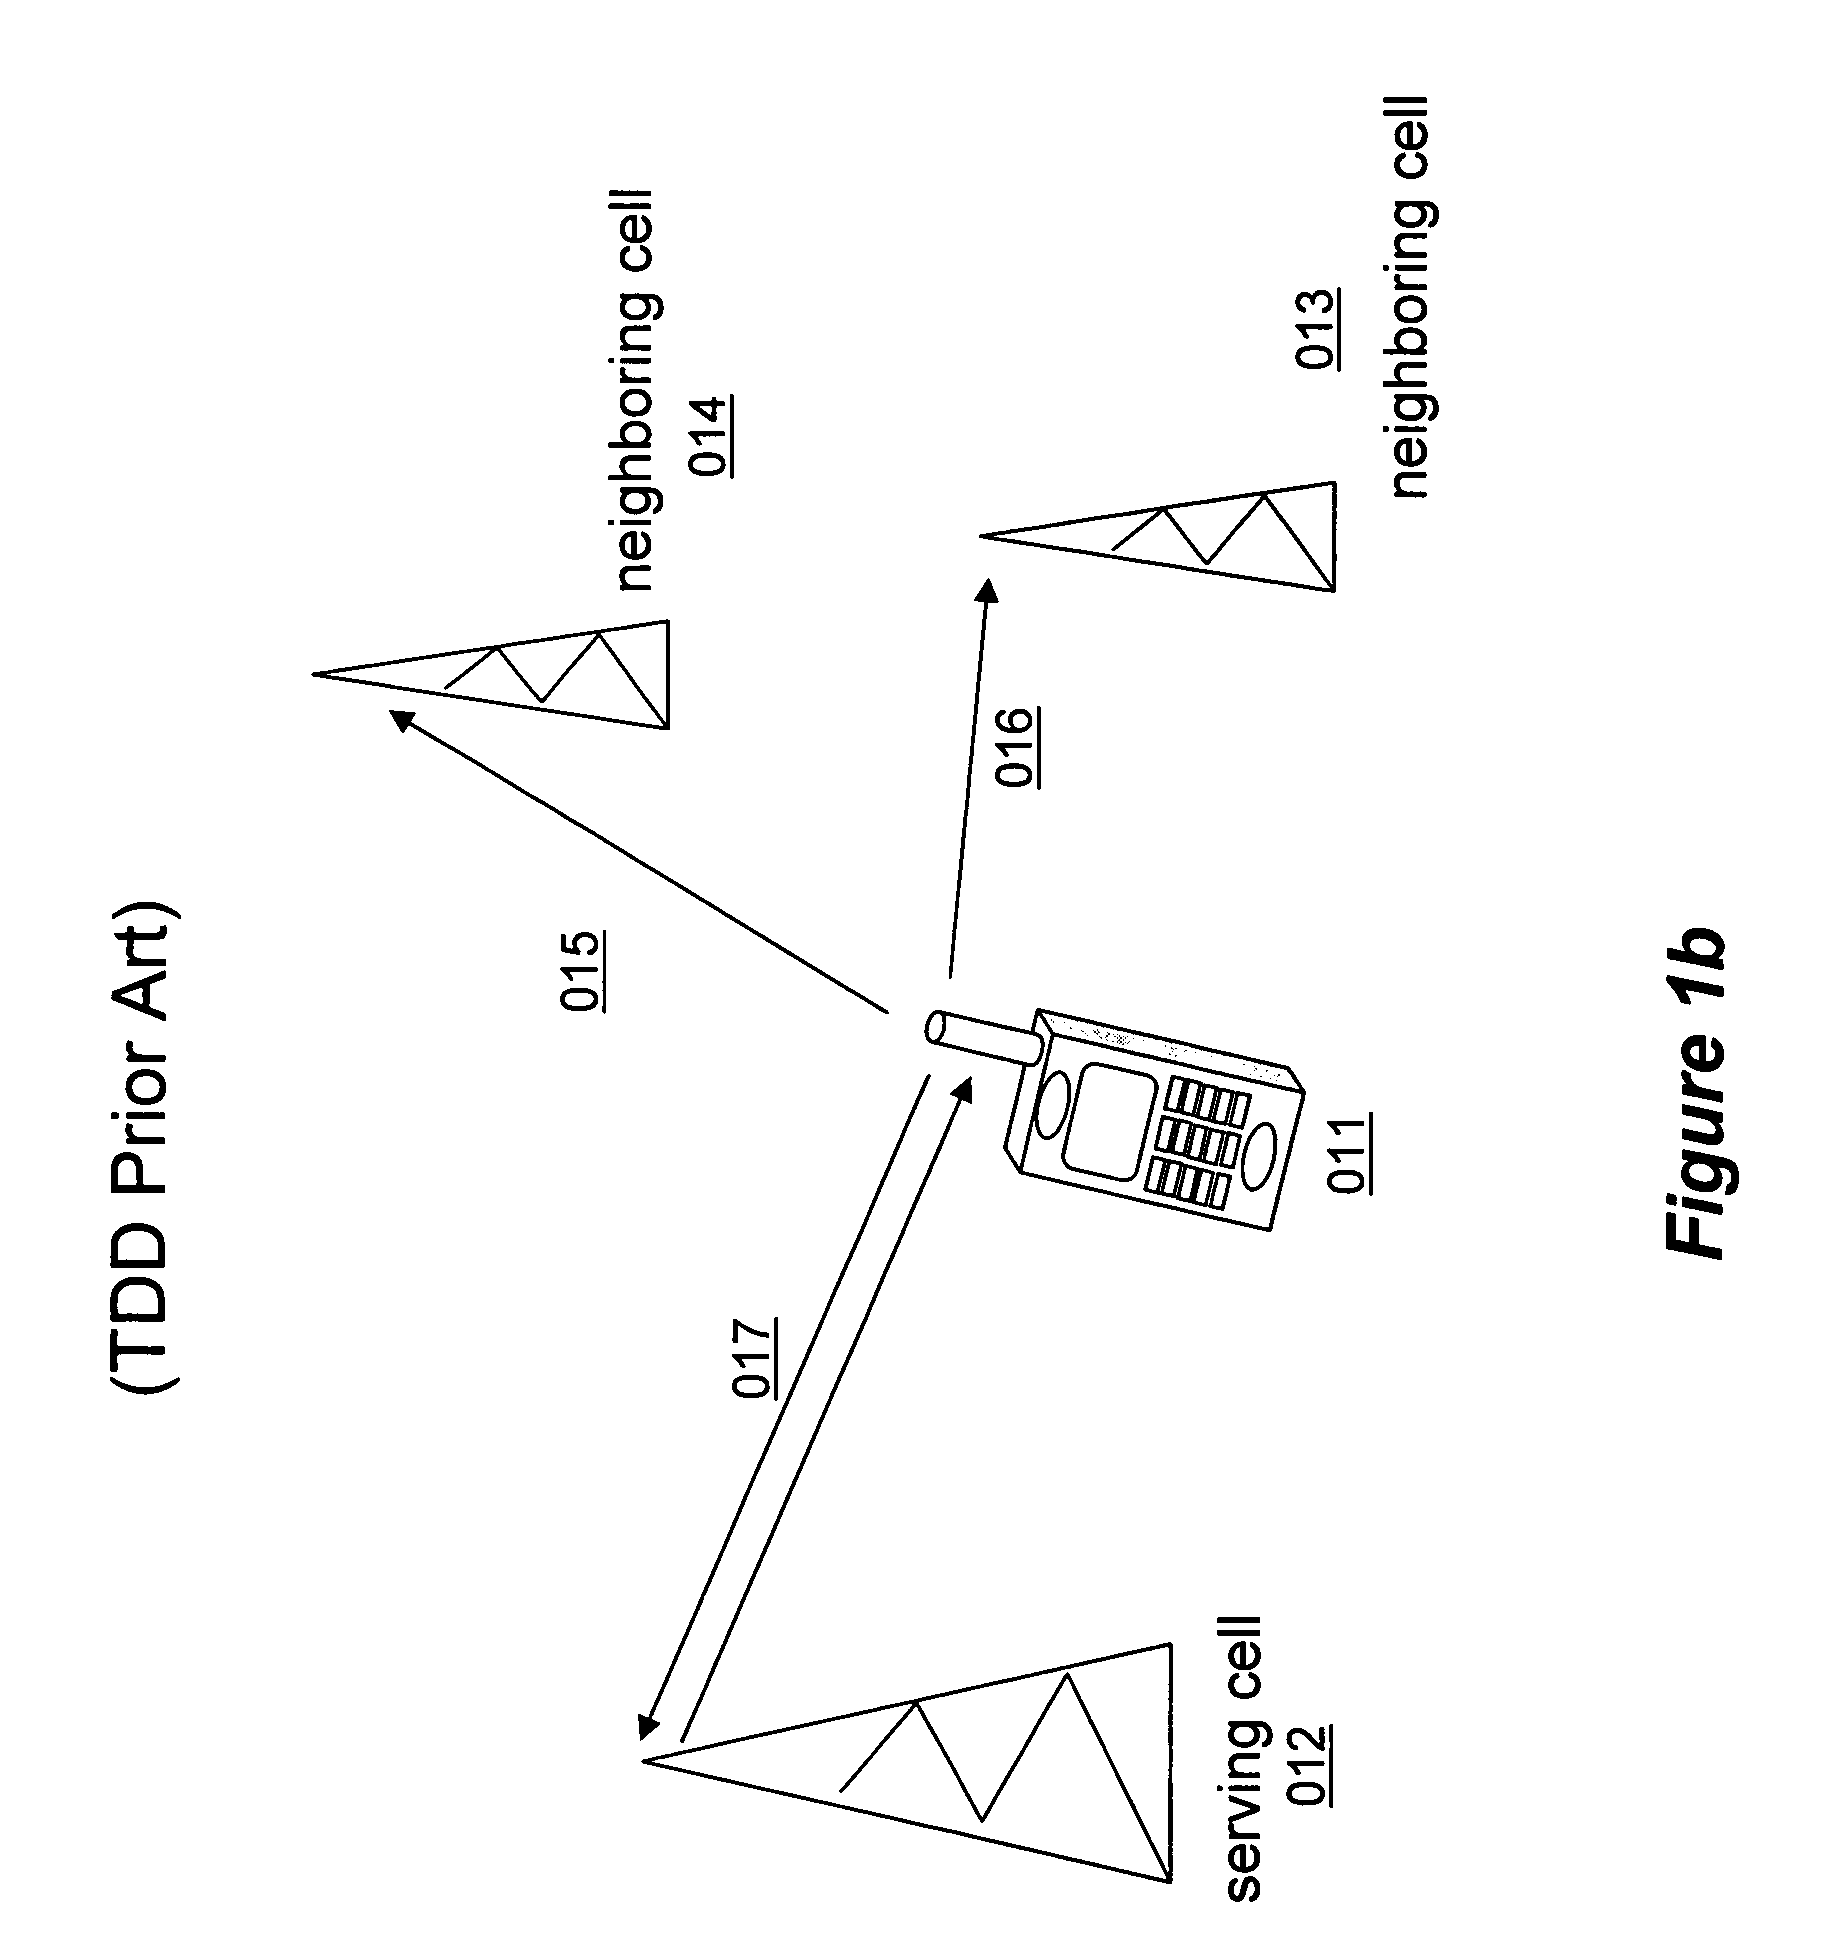 Uplink resource allocation to control intercell interference in a wireless communication system